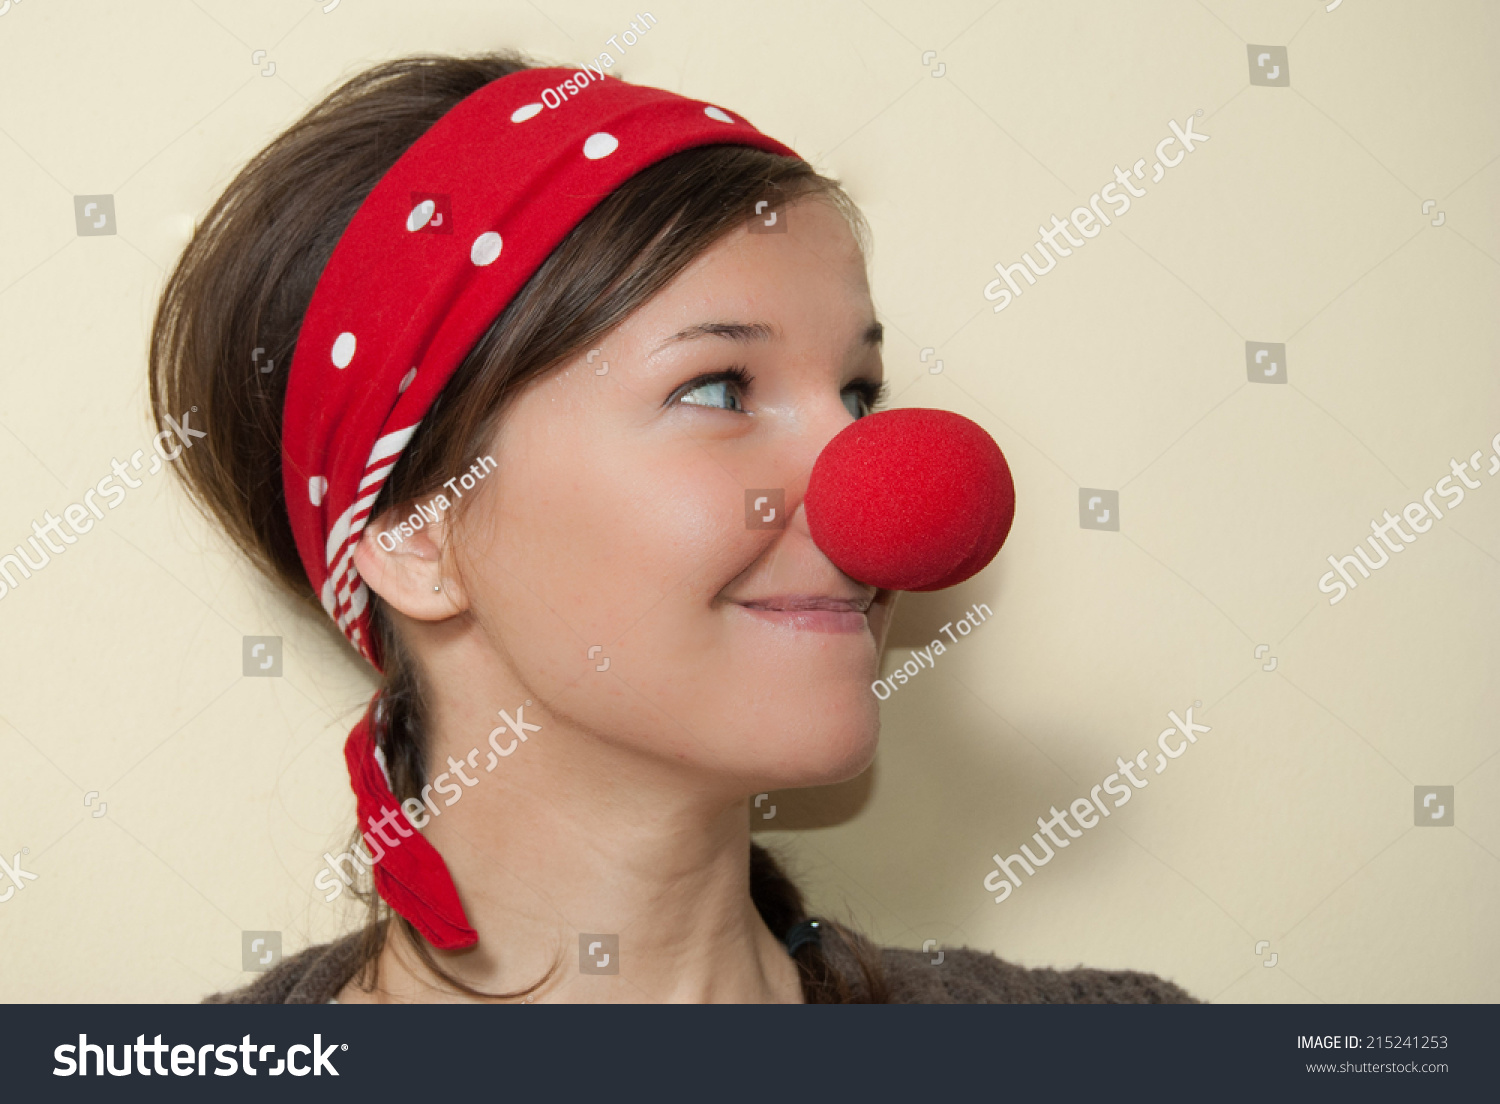 stock-photo-portrait-of-a-girl-with-red-clown-nose-215241253.jpg